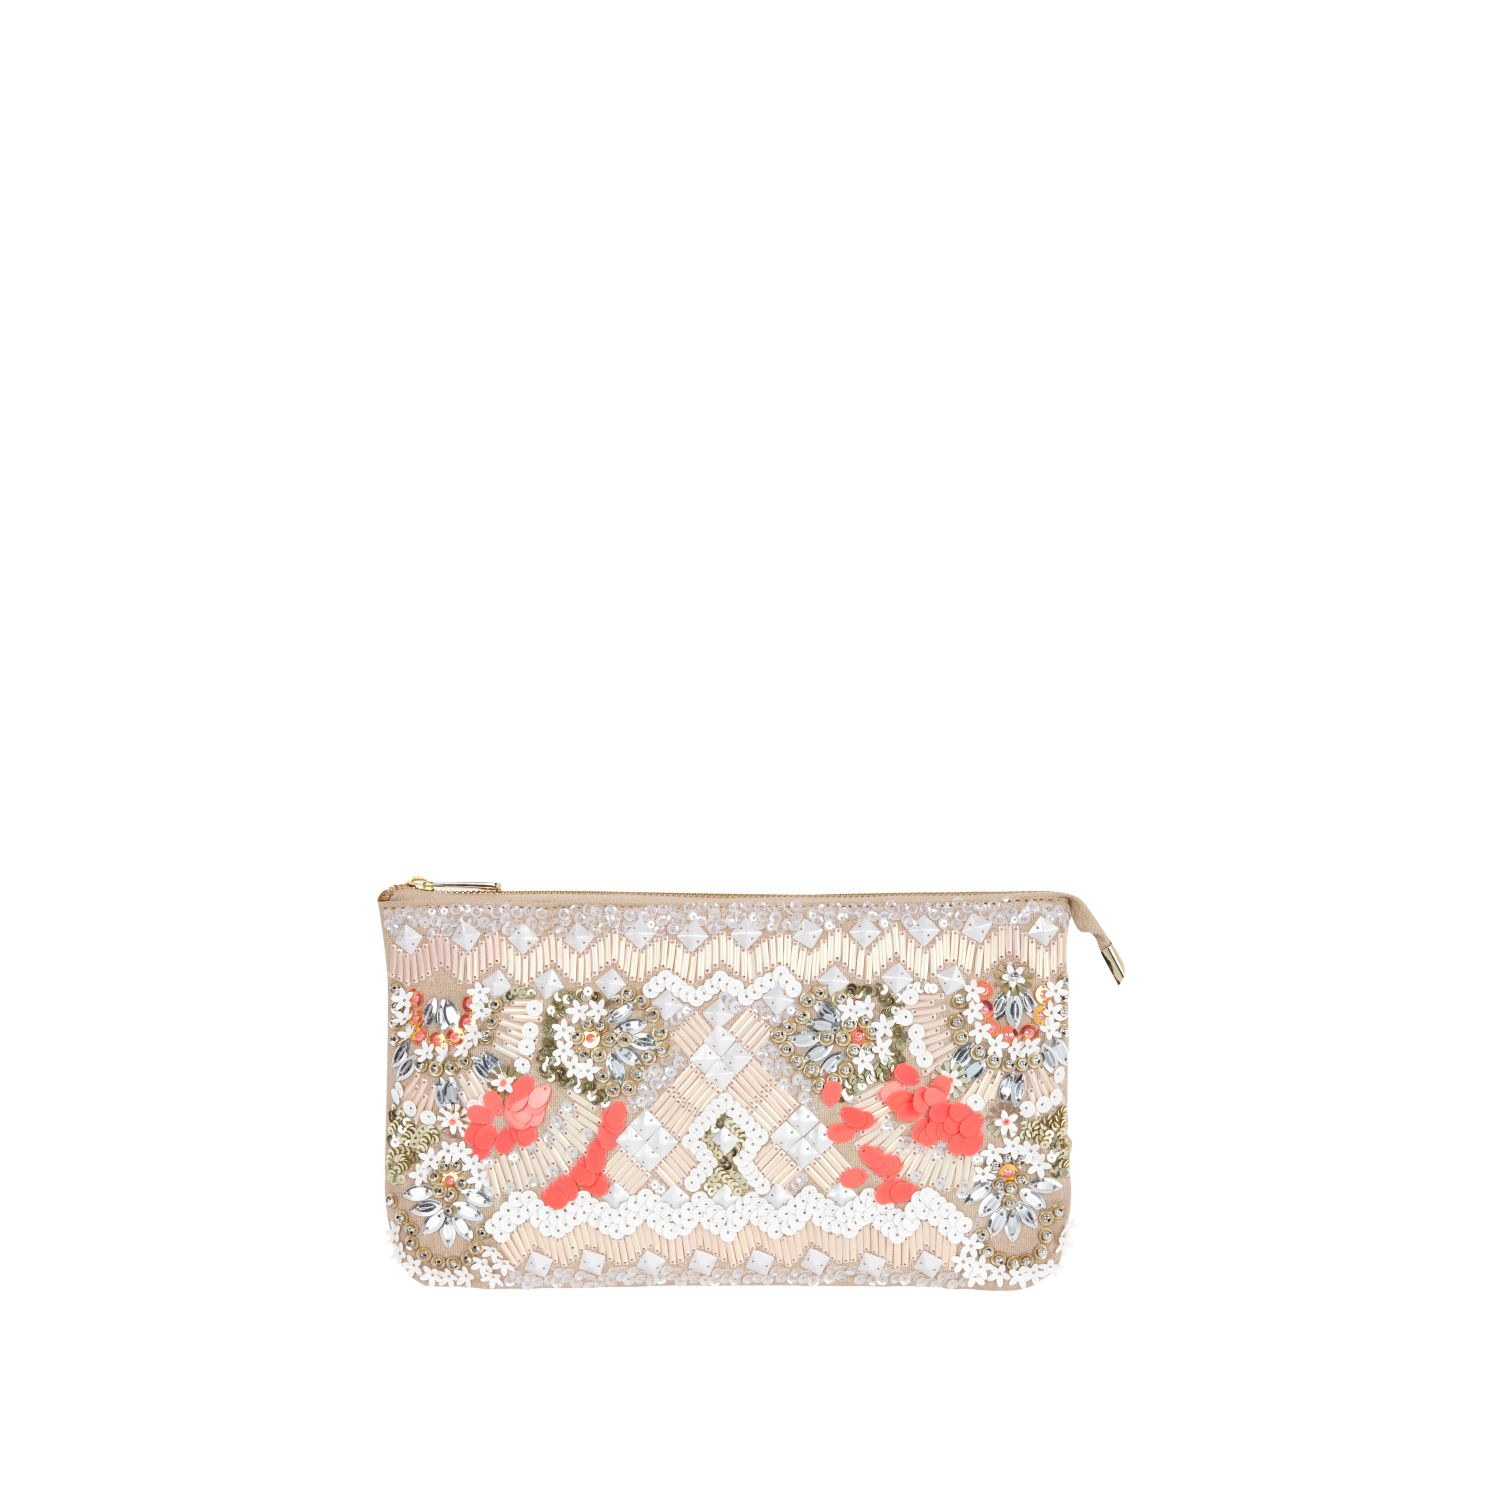 River island Light Pink Beaded Clutch Bag in Floral (pink) | Lyst